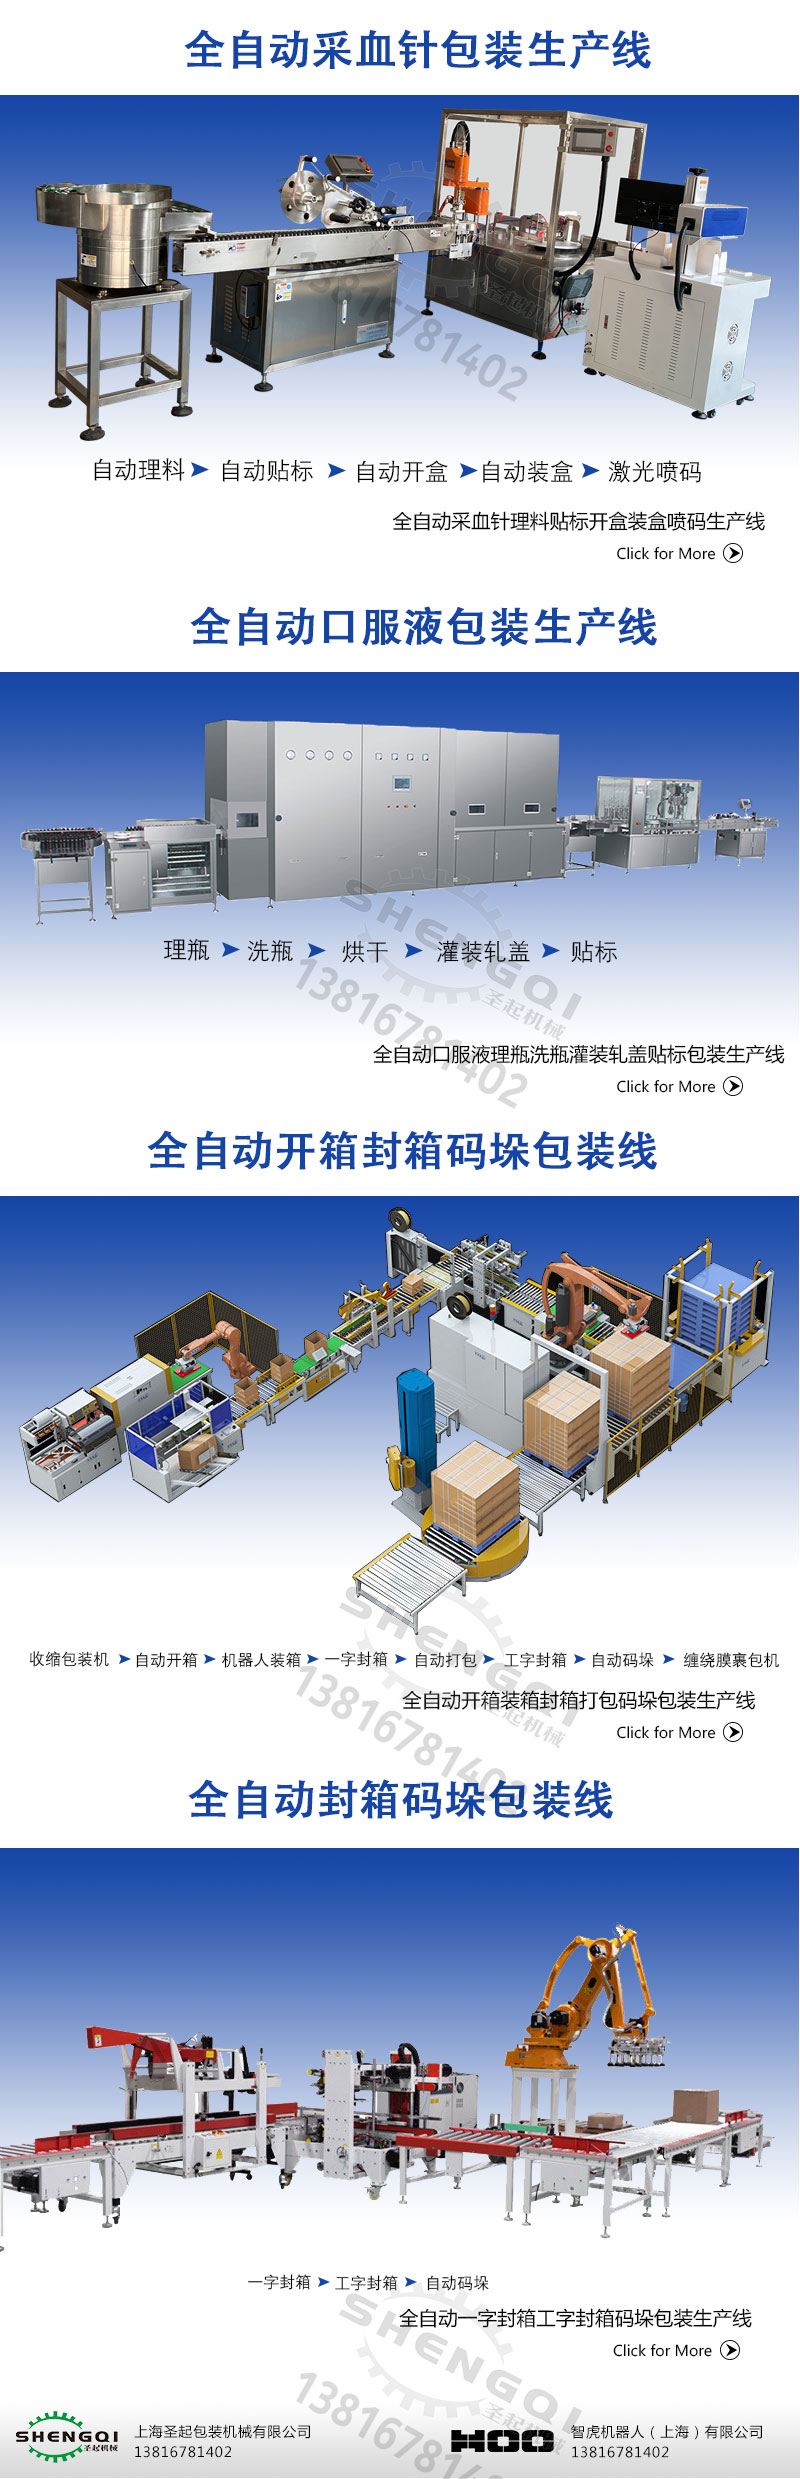 Automatic paper box filling machine manufacturer fully automatic drug box filling and health product box filling machine